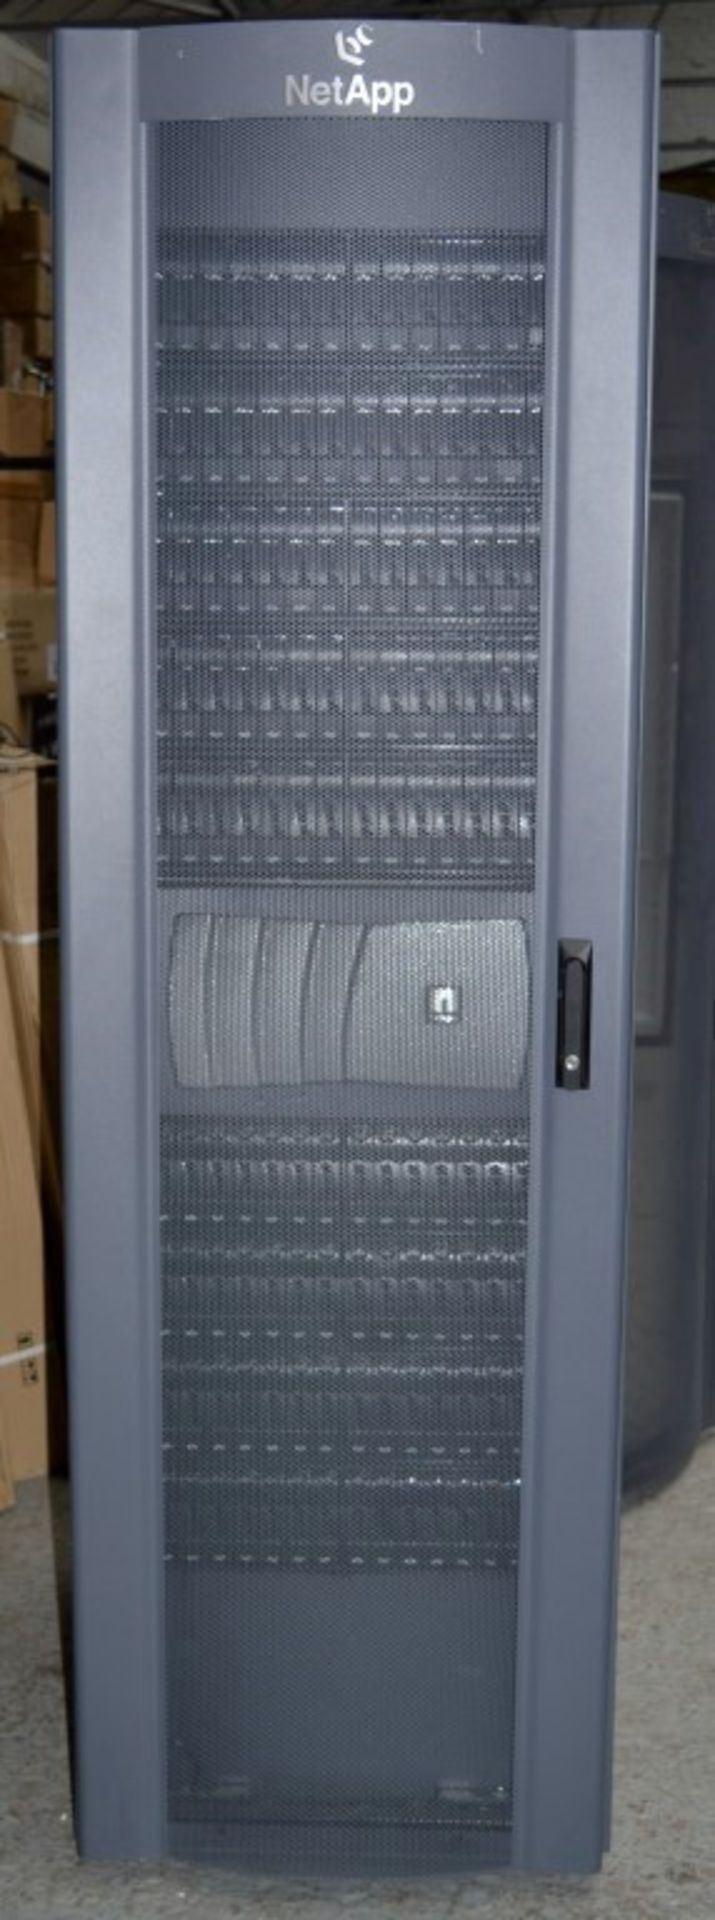 1 x Network Appliance Netapp Filer - Netapp Data Rack With 1 x FAS3140 Controller and 9 x DS14 MK2 - Image 11 of 23